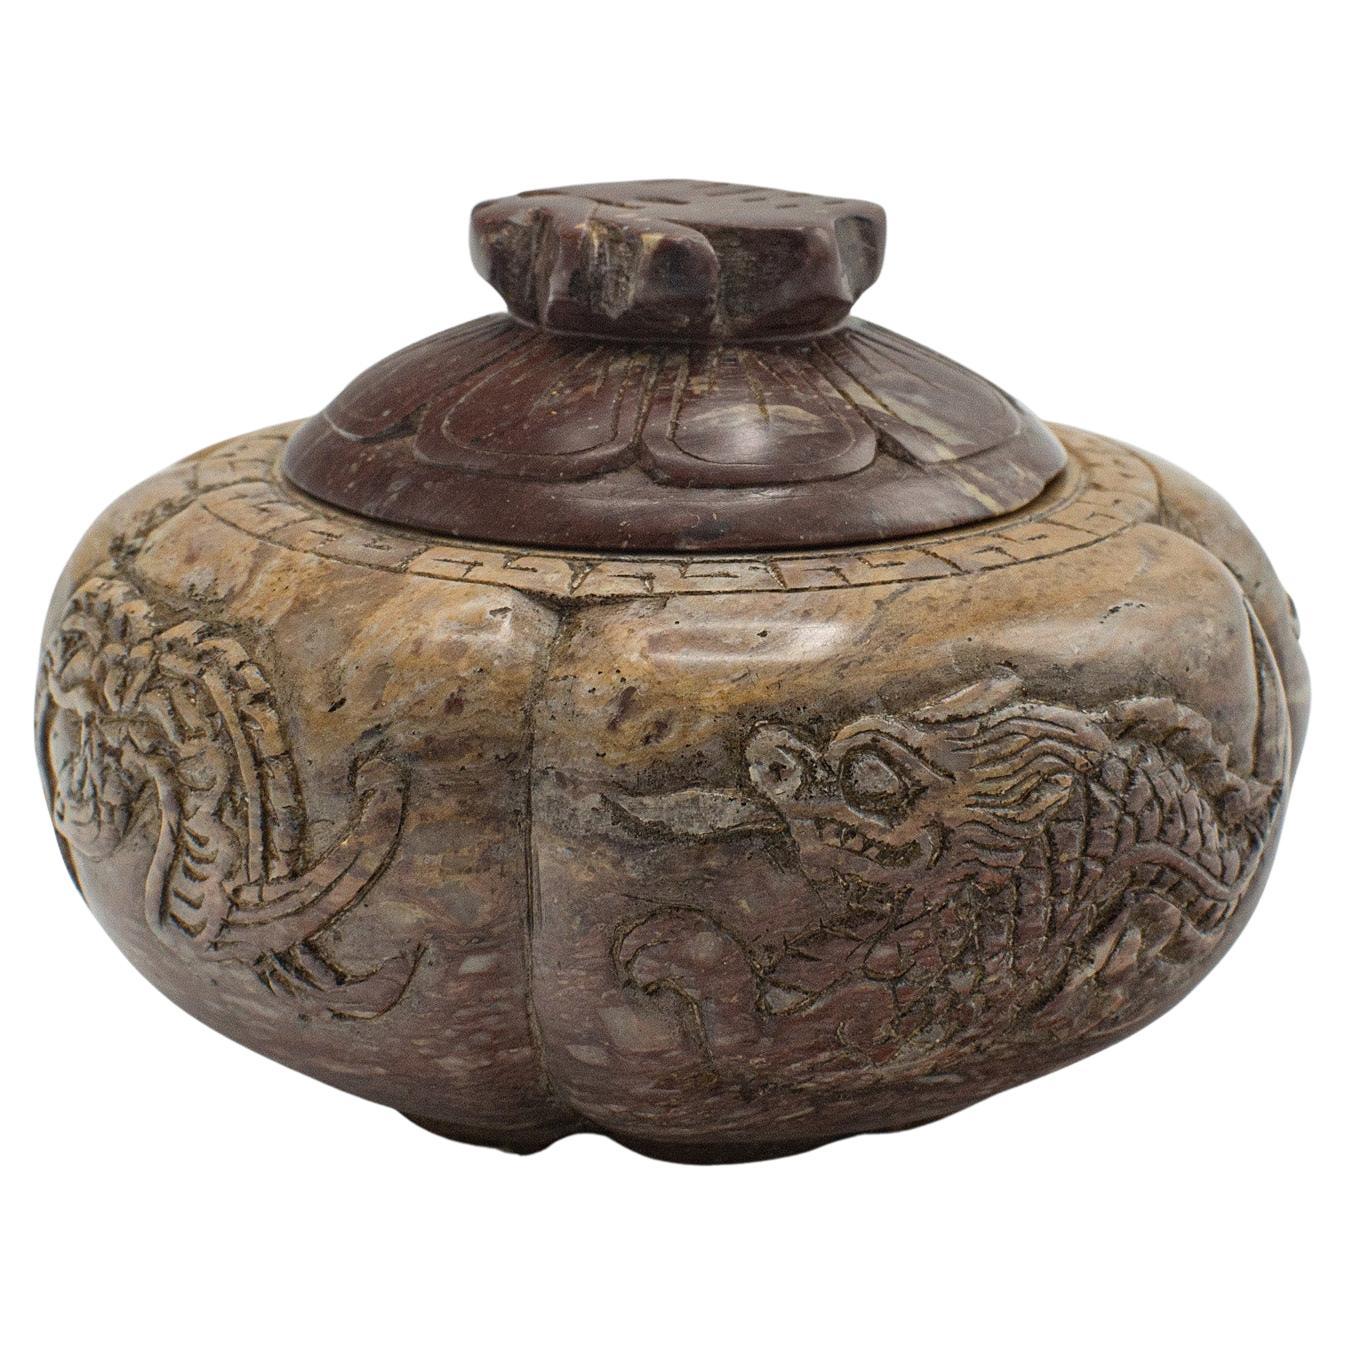 Small Antique Lidded Pot, Chinese, Carved, Soapstone, Snuff Jar, Victorian, 1900